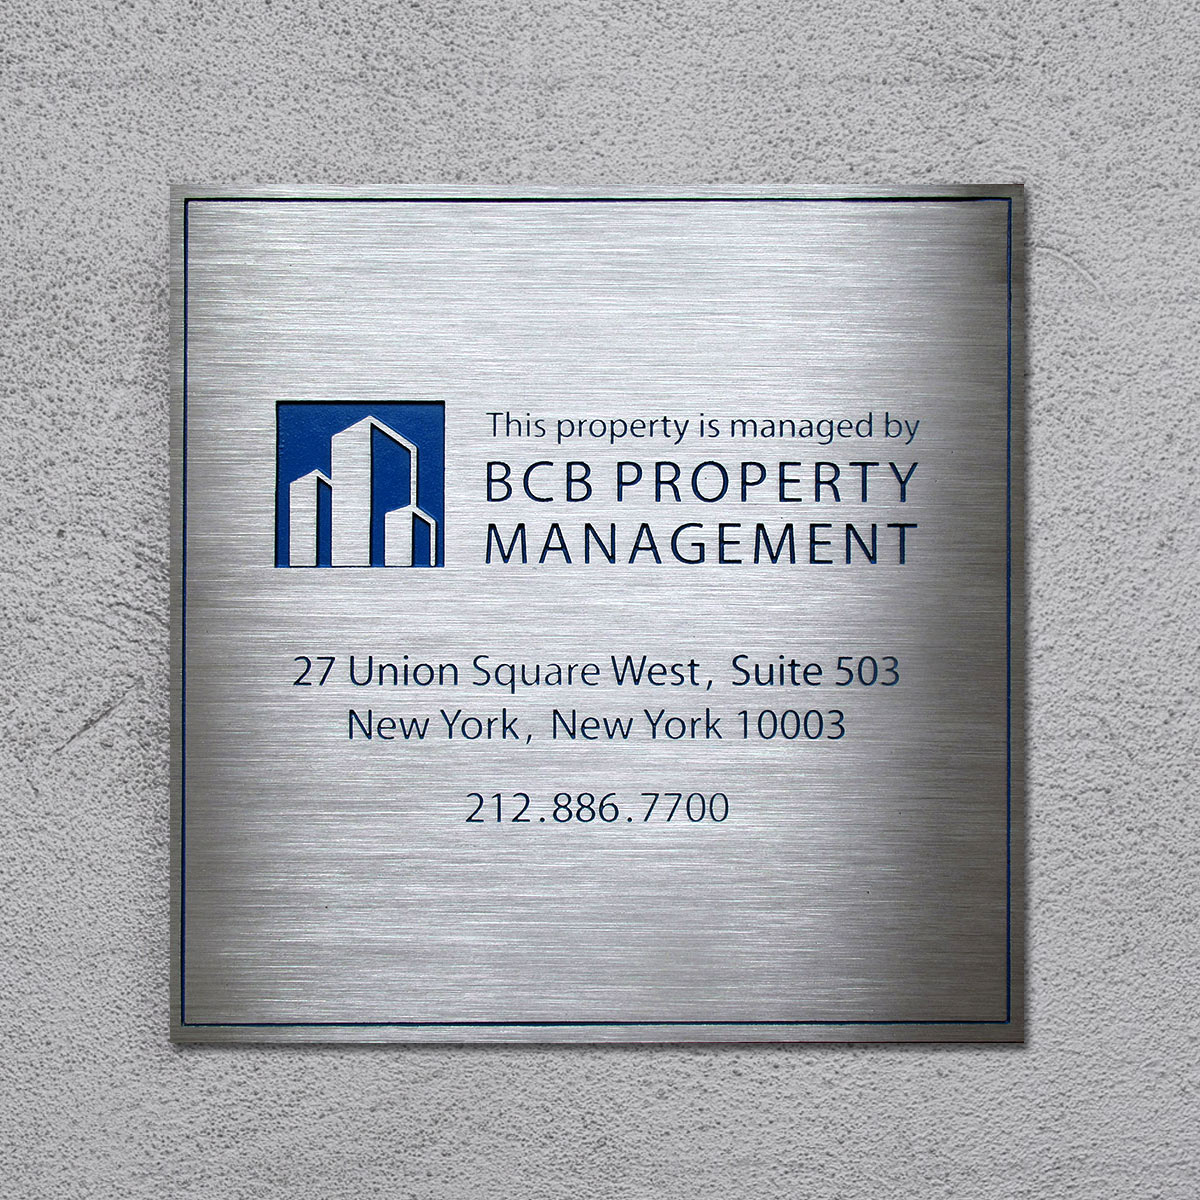 masterwork-plaques-bcb-property-management-union-square-stainless-steel-wall-plaque.jpg